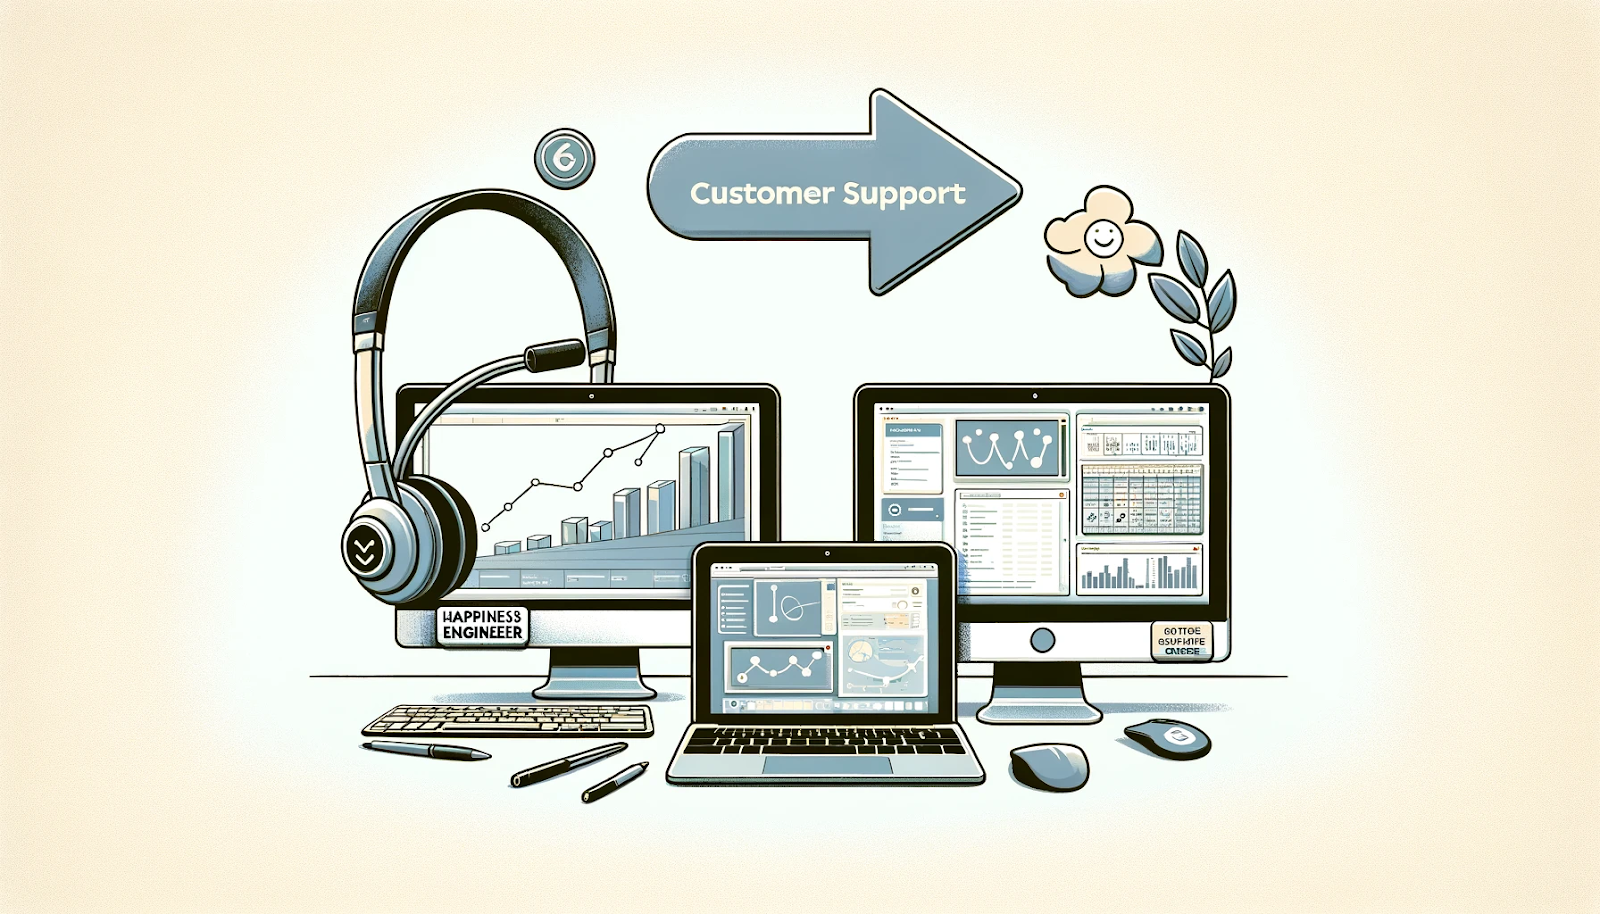 Illustration showing the evolution of tools from customer support to data science. The left side features customer support tools like a headset and a laptop, transitioning to the right with advanced data science tools, including multi-screen computers with data analysis software, graphs, and coding environments. The background is light and matches the theme.